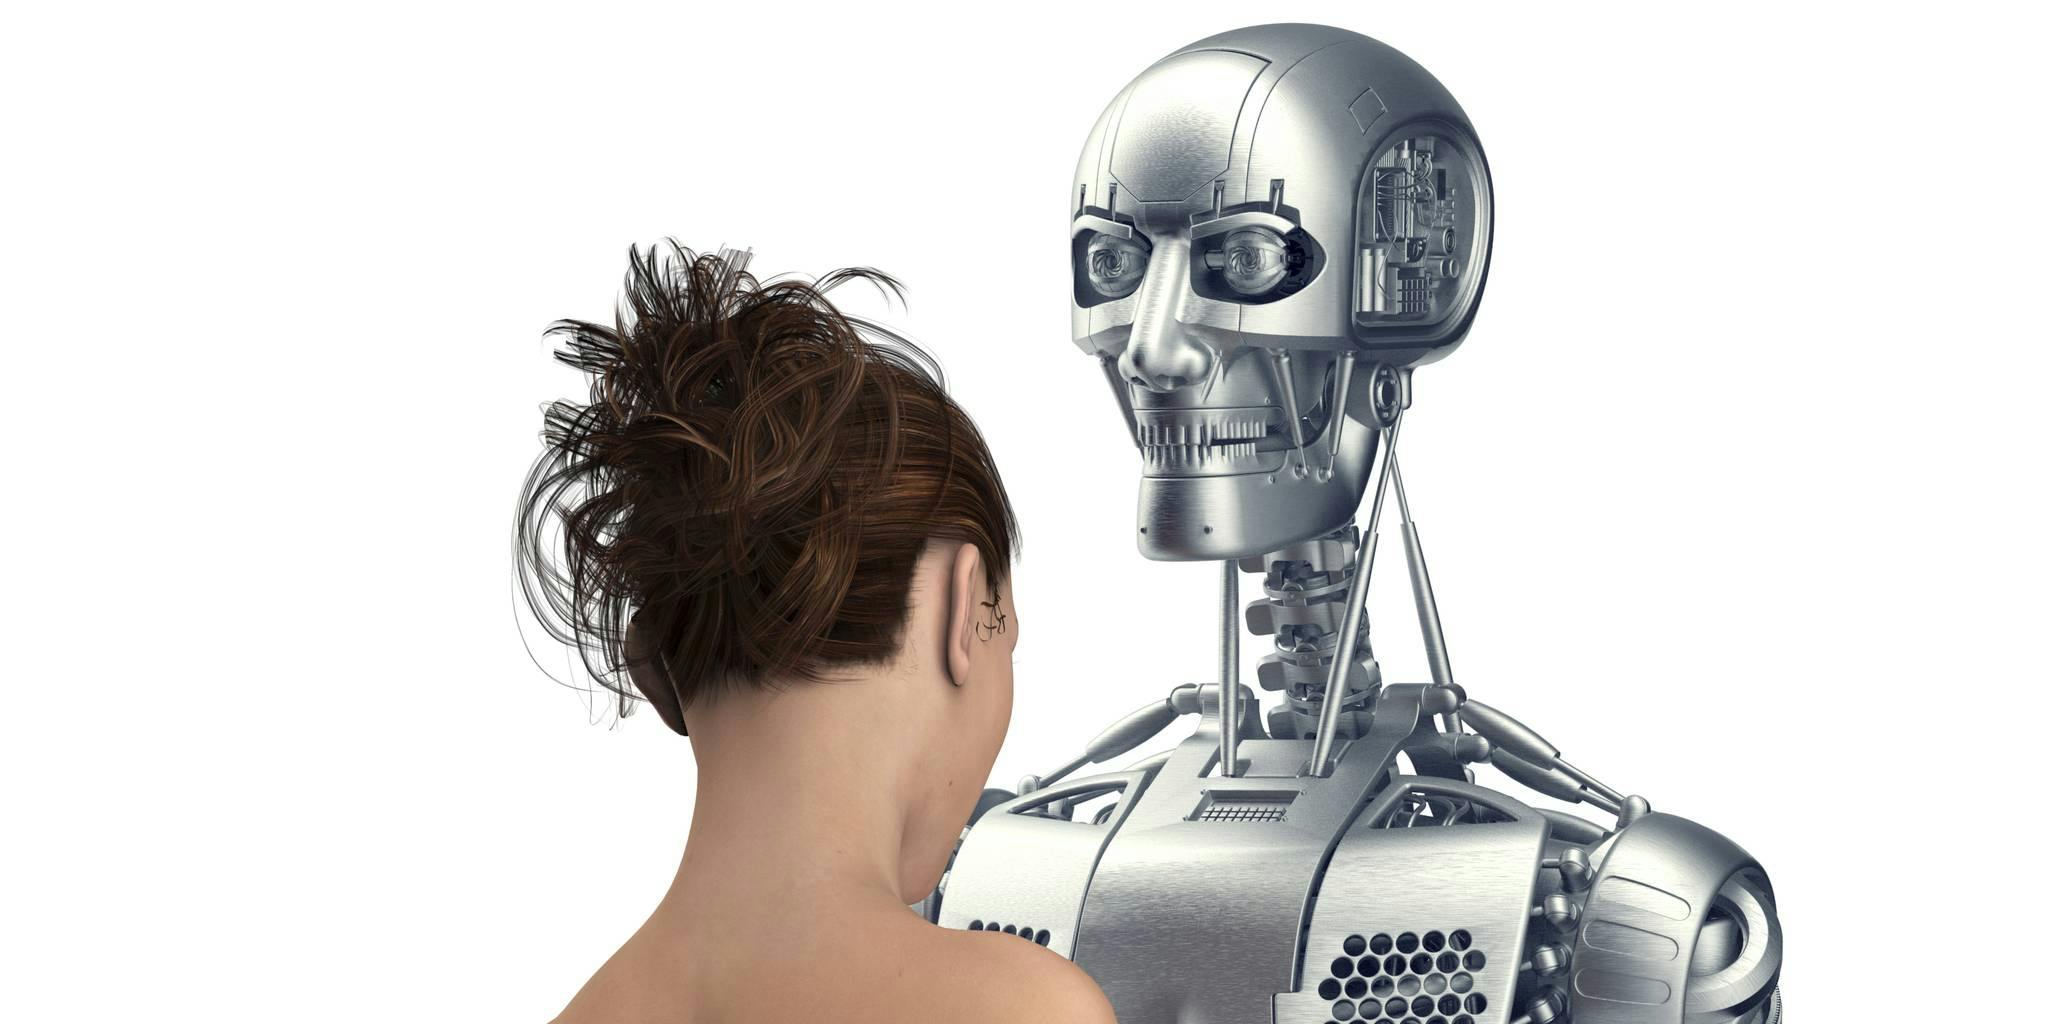 Of course we'll all be having sex with robots by 2050 - The Daily Dot